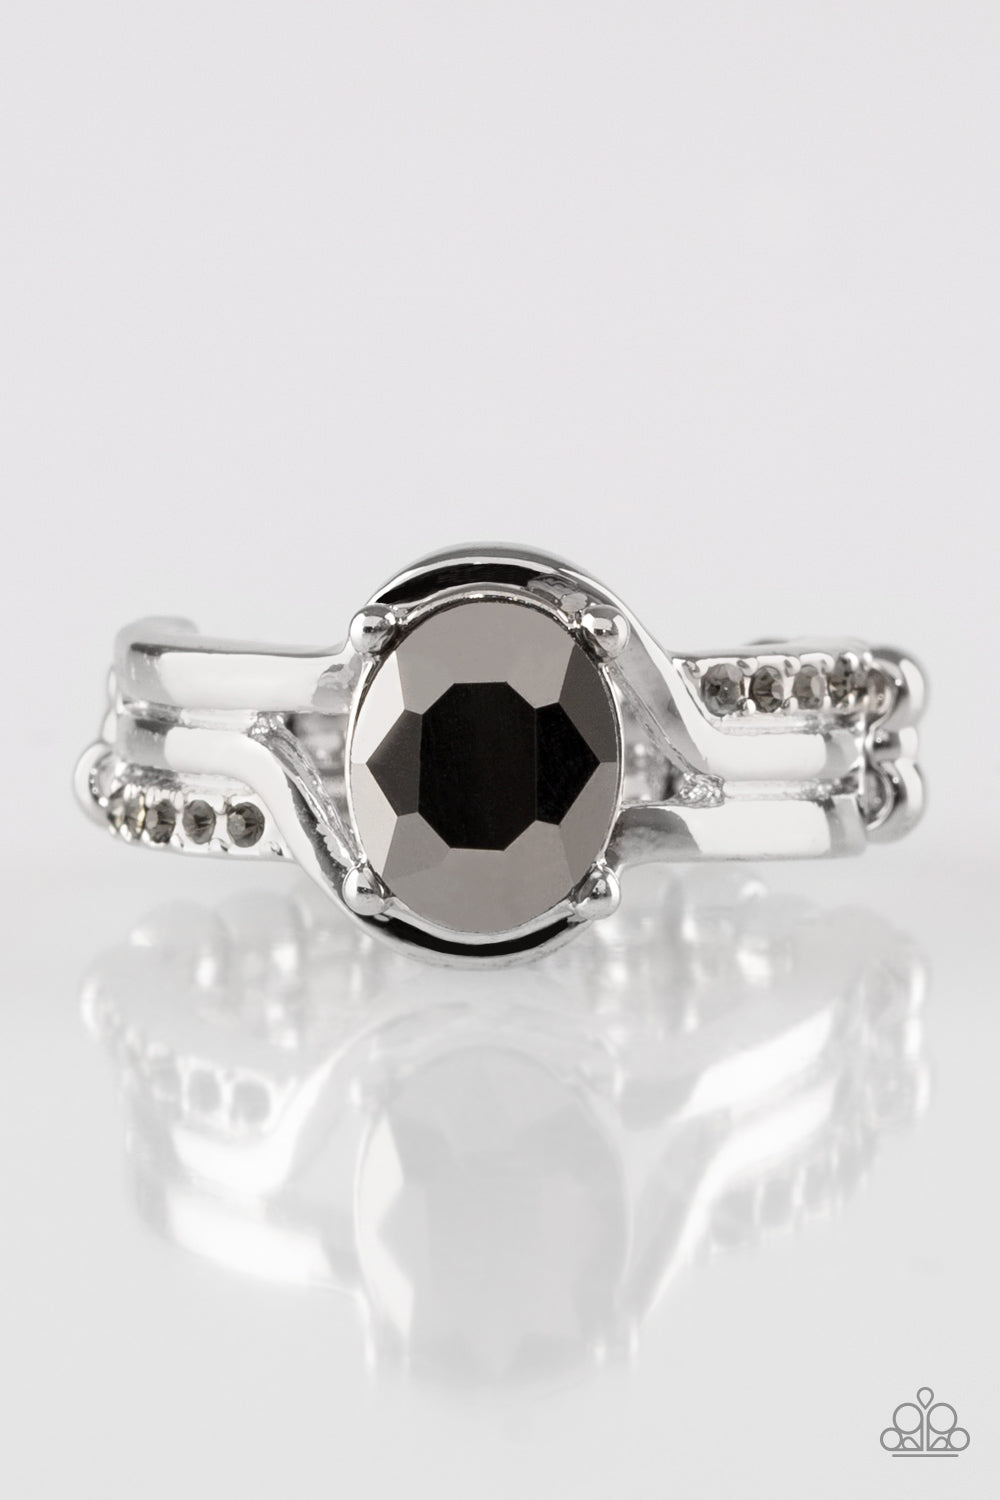 HOME IS WHERE THE CASTLE IS - SILVER OVAL HEMATITE RING